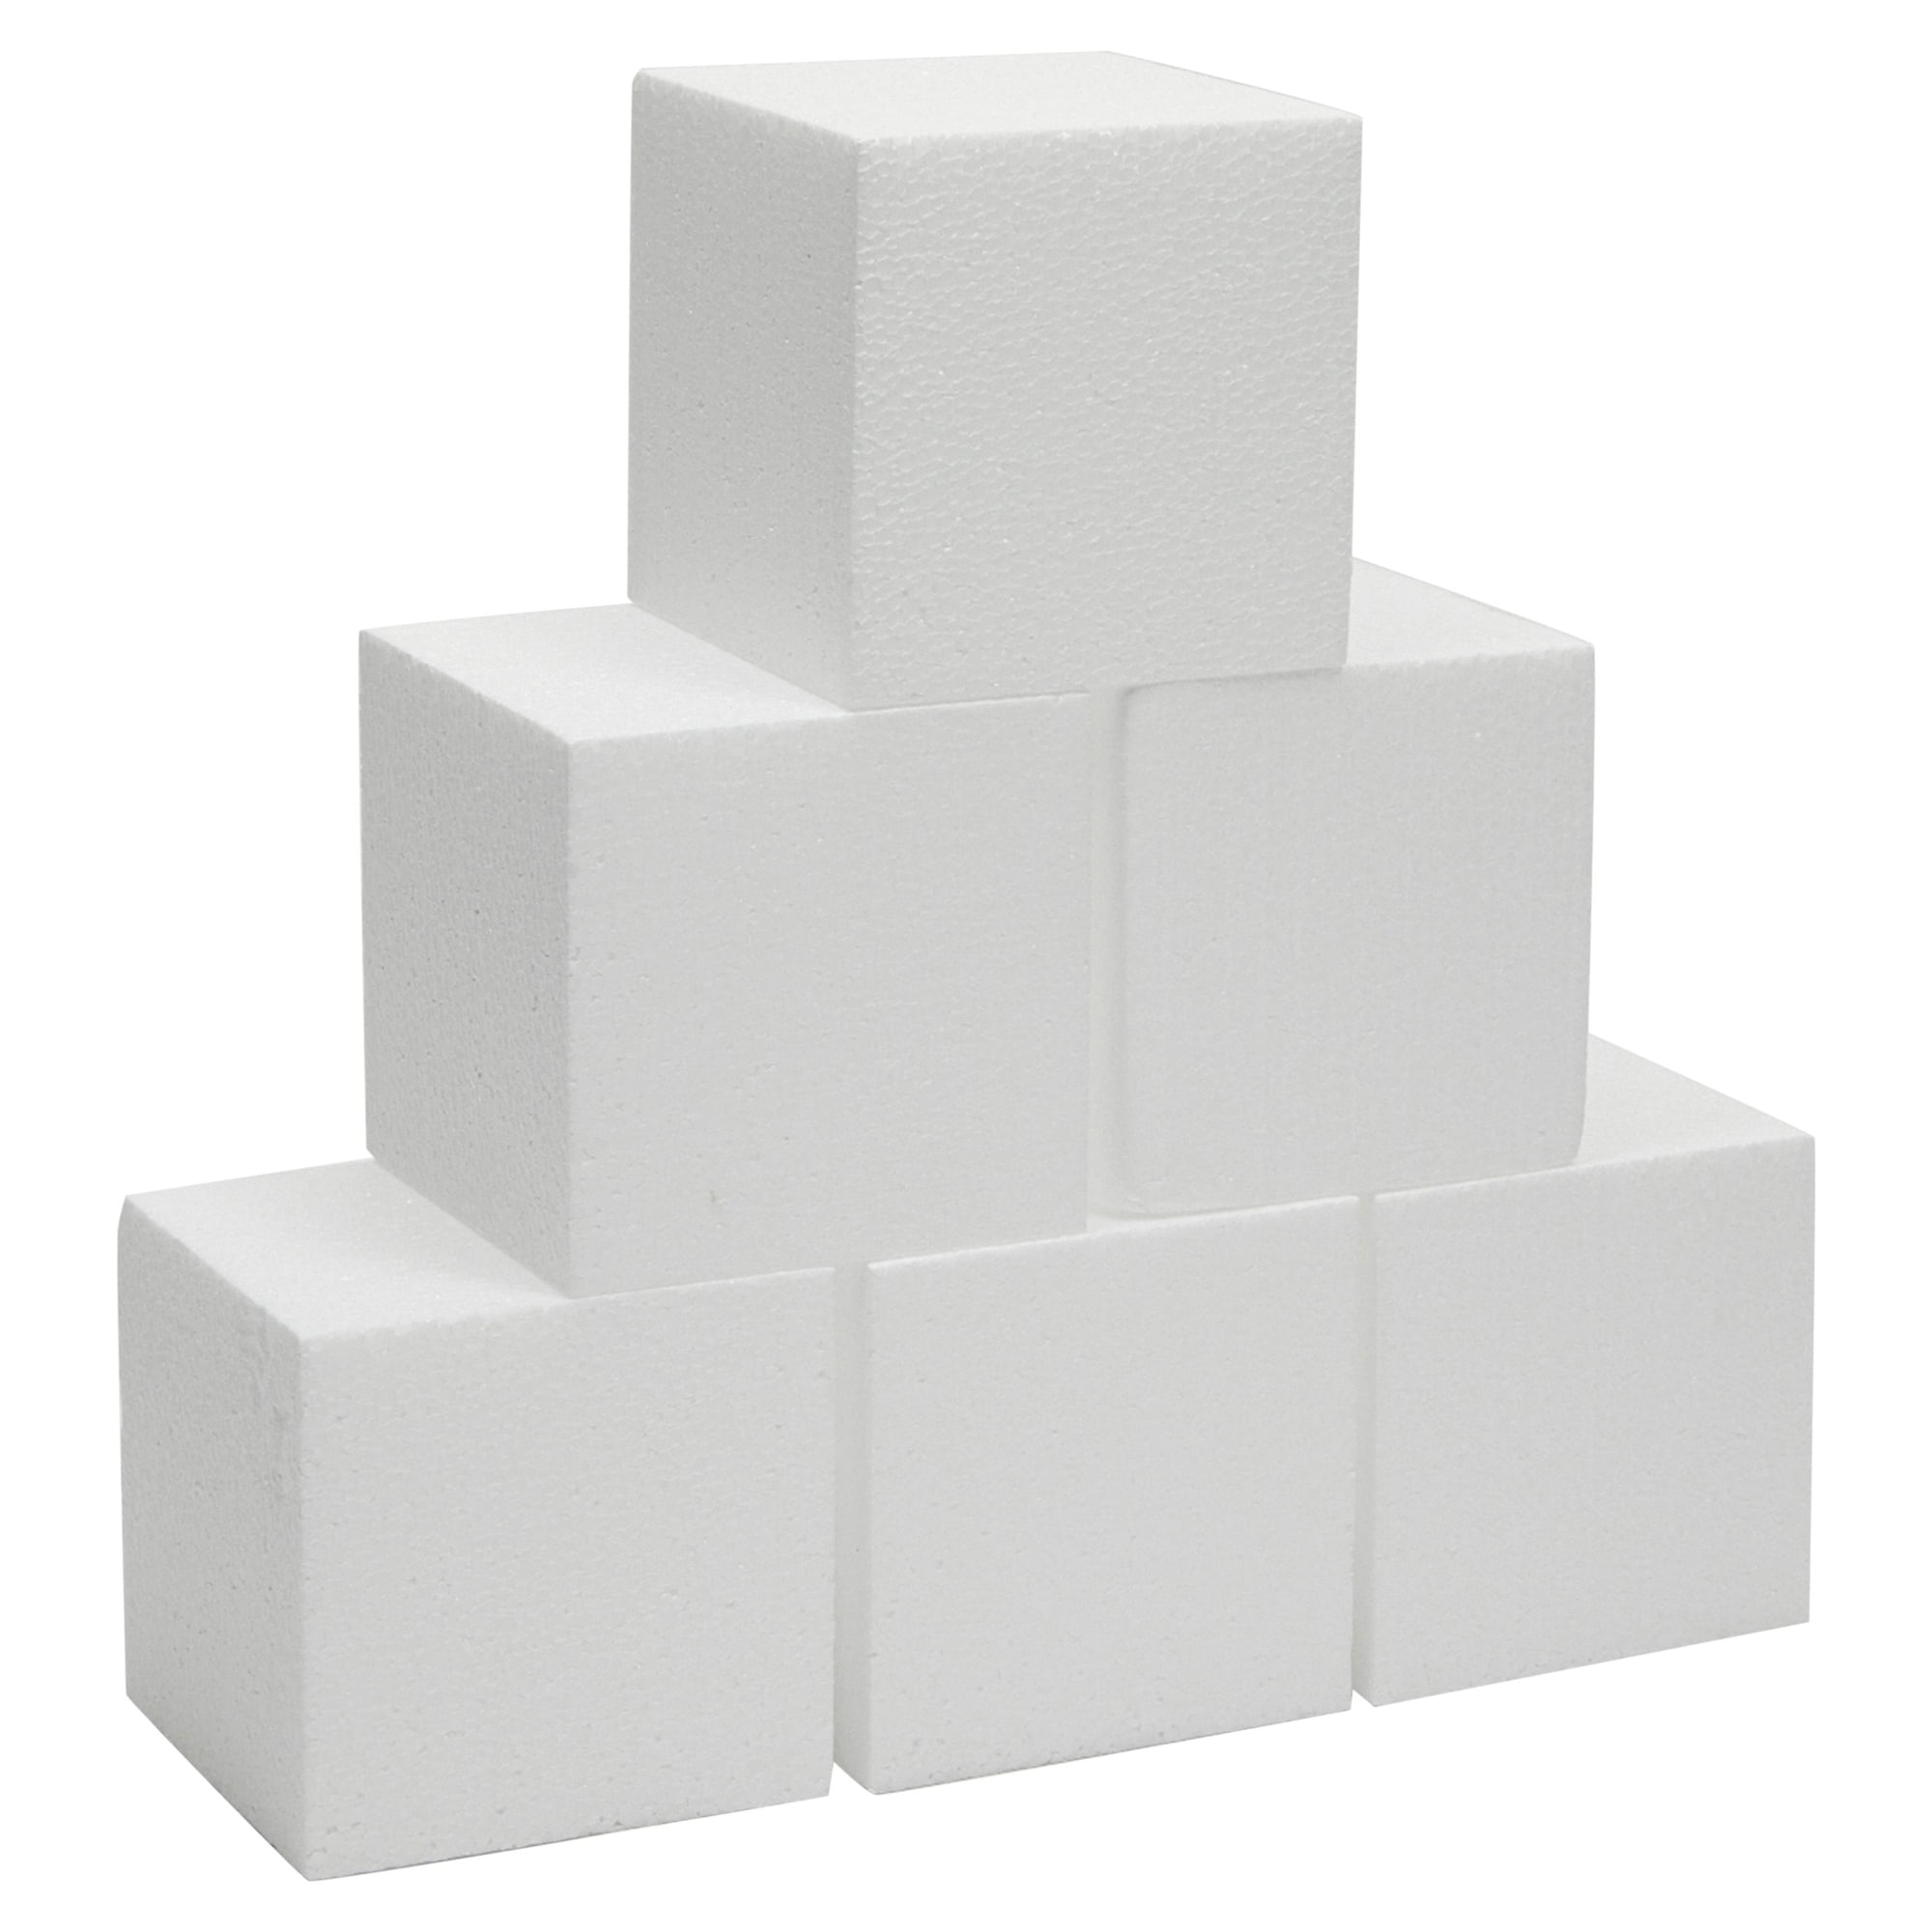 6 Pack Foam Cube Squares for Crafts - Polystyrene Blocks for DIY, Floral  Arrangements, Arts Supplies (4 x 4 x 4 in, White) 